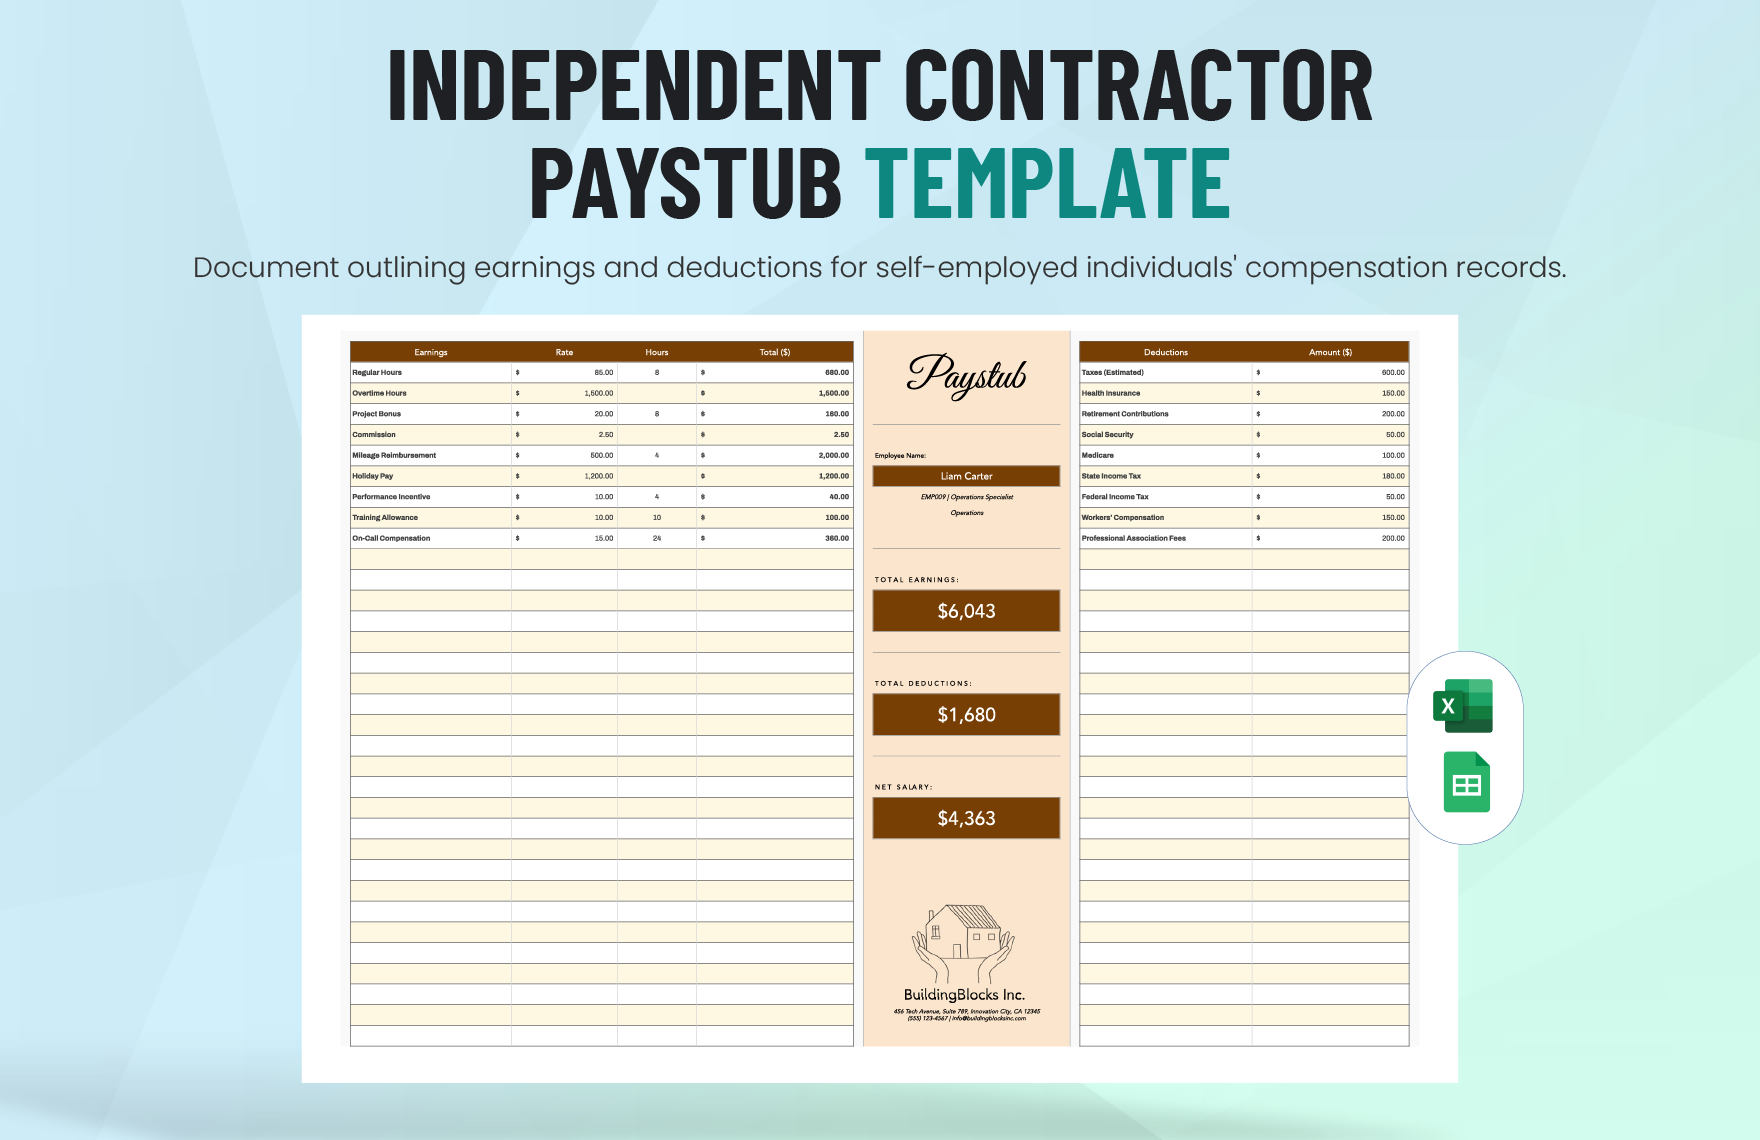 Independent Contractor Paystub Template in Excel, Google Sheets